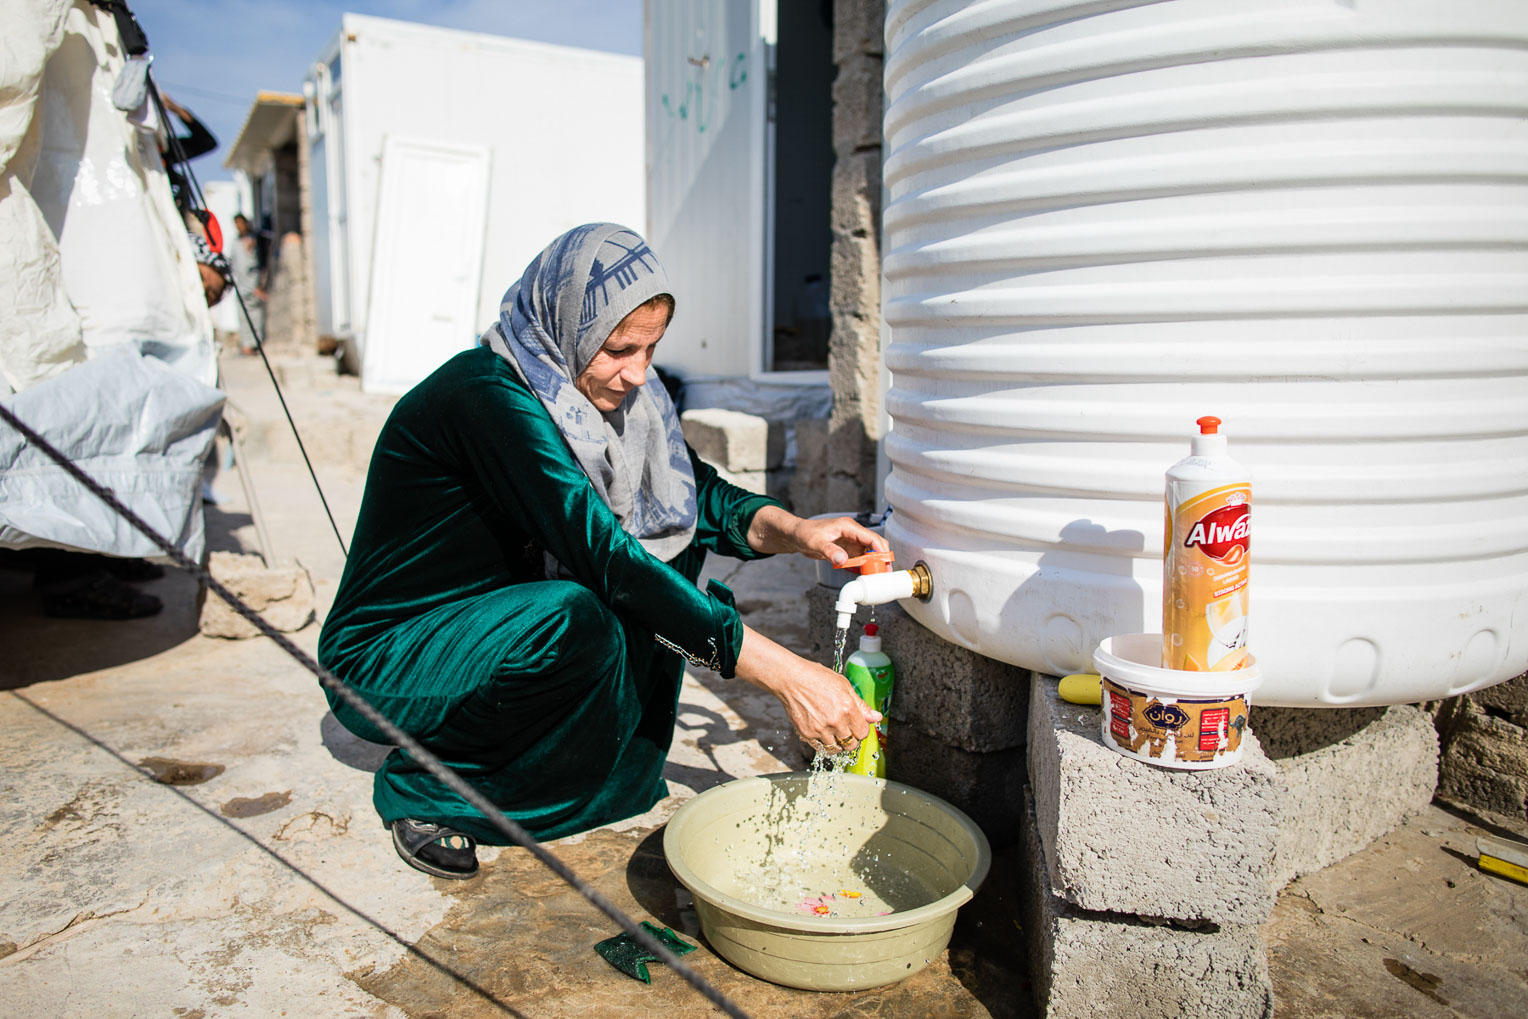 Yekta now has reliable access to water since Samaritan's Purse provided 500-liter tanks to store the precious resource.